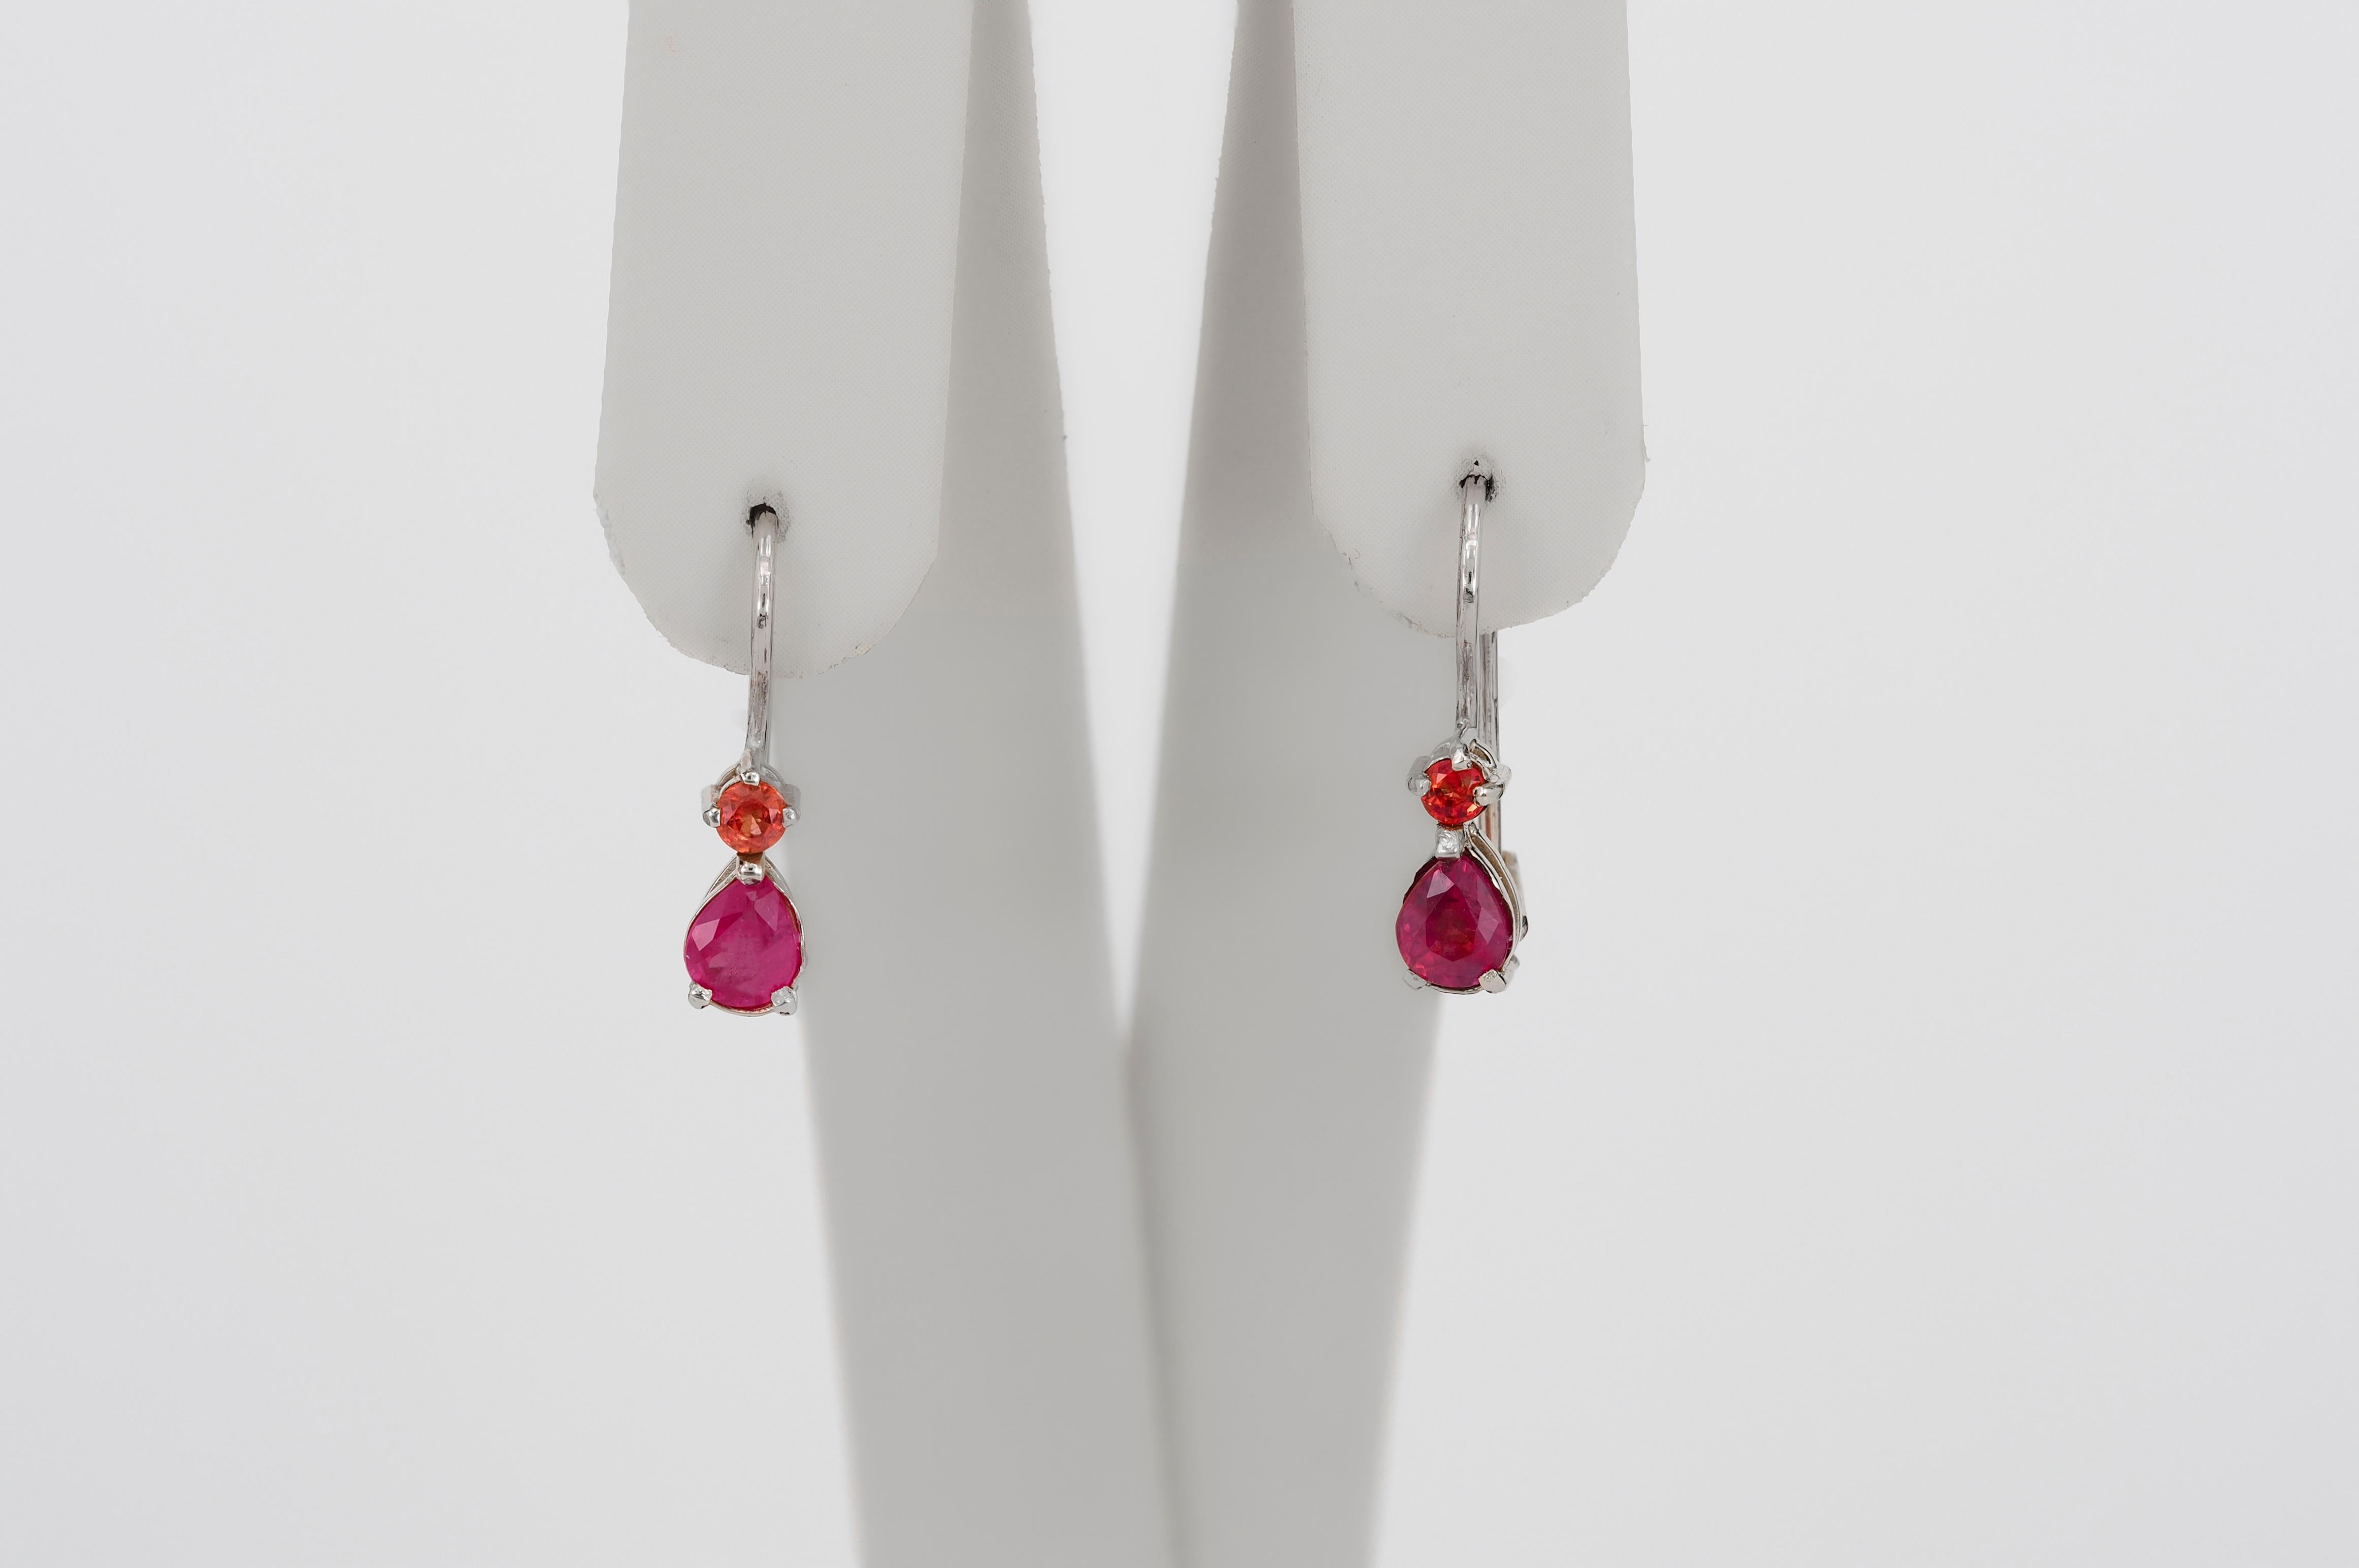 Genuine 1 ct rubies and sapphires earrings. 
14k solid gold earrings. Pear ruby earrings. Red gemstone earrings. Small tiny earrings.

Weight: 1.63 g.
Size: 17.6x5mm .
Metal: 14k gold.

Central stones: Rubies
2 pieces, pear cut
Weight: 0.84 ct (2 x